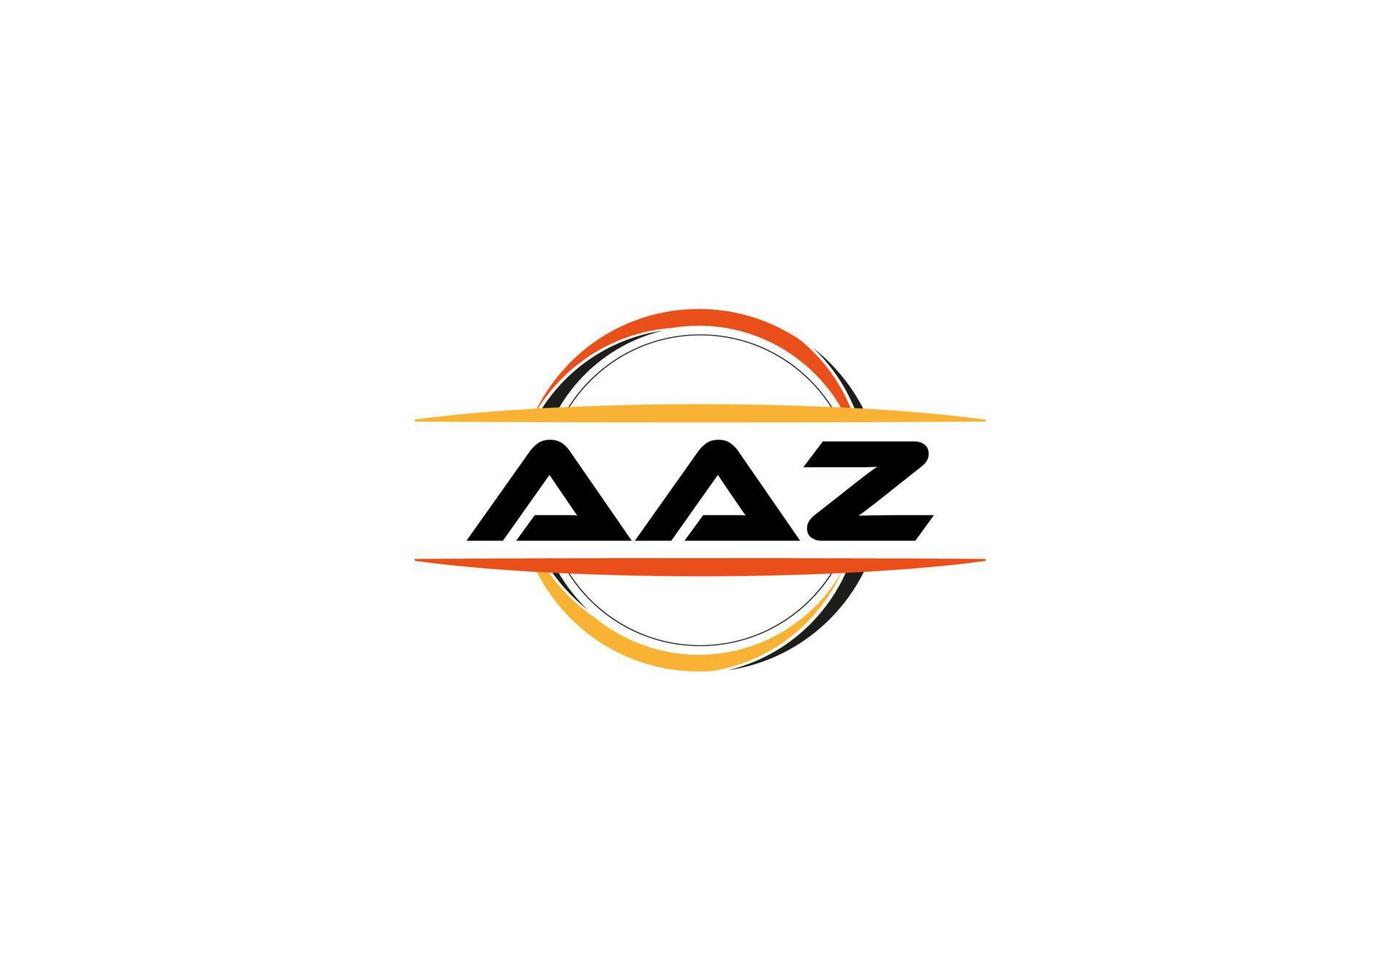 AAZ letter royalty ellipse shape logo. AAZ brush art logo. AAZ logo for a company, business, and commercial use. vector